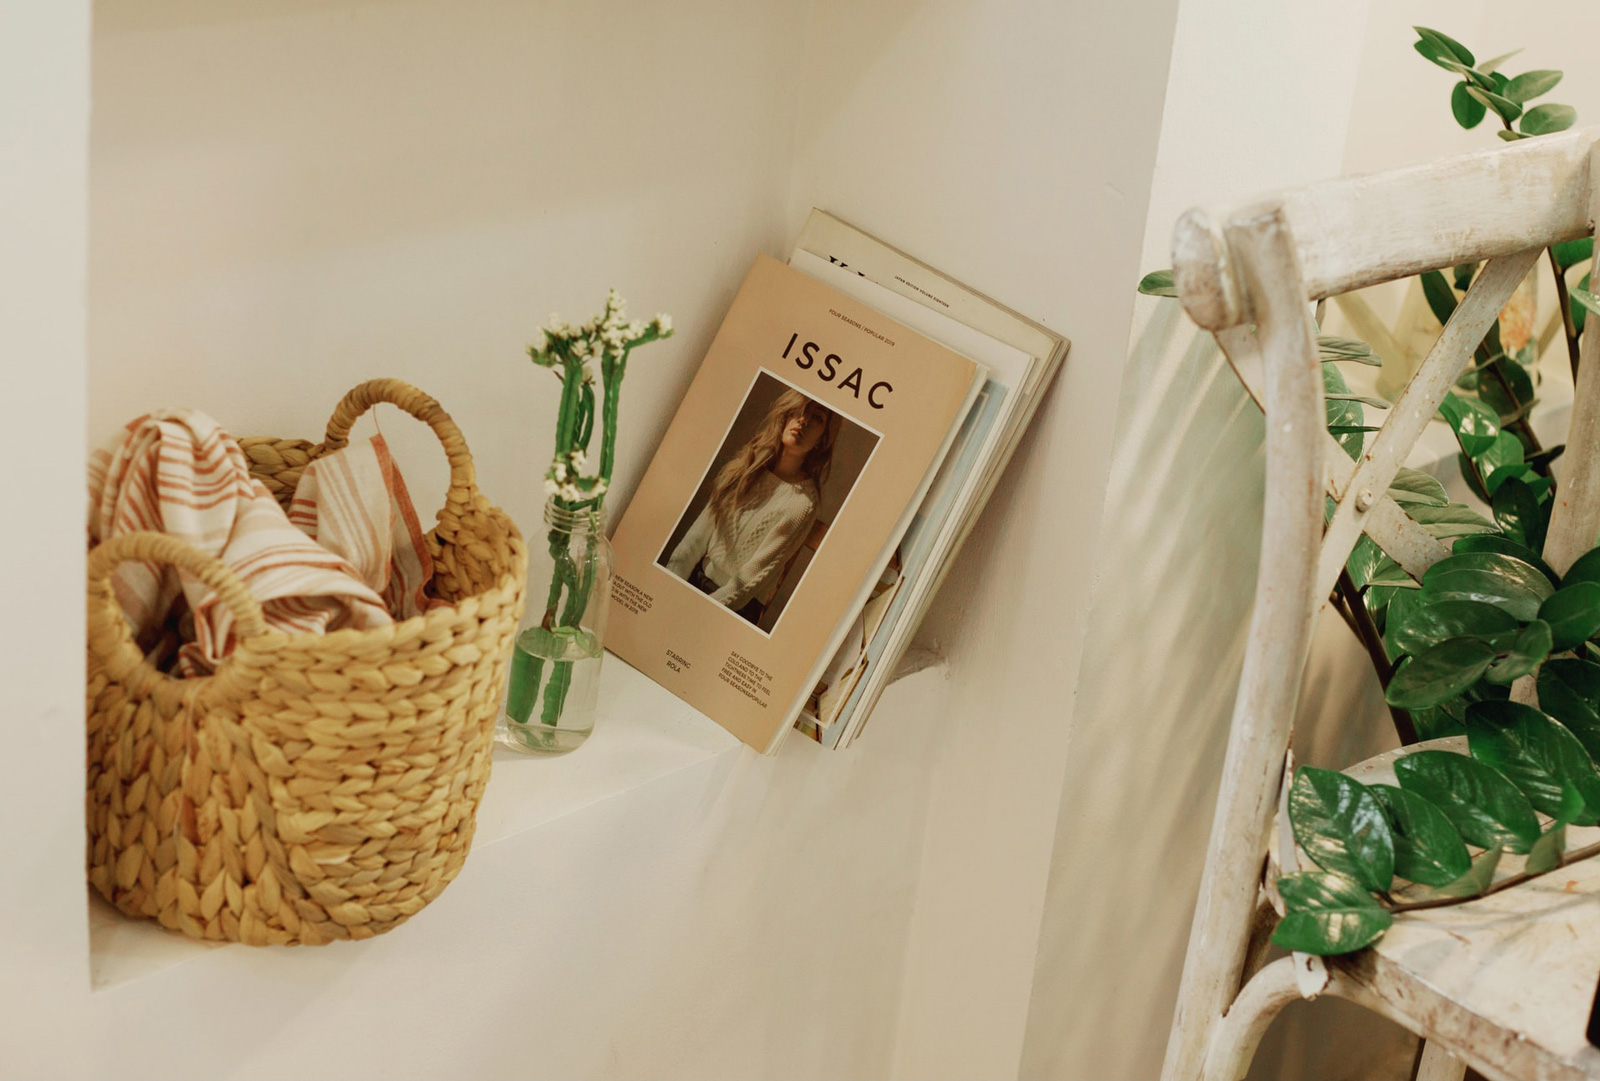 Basket with Book